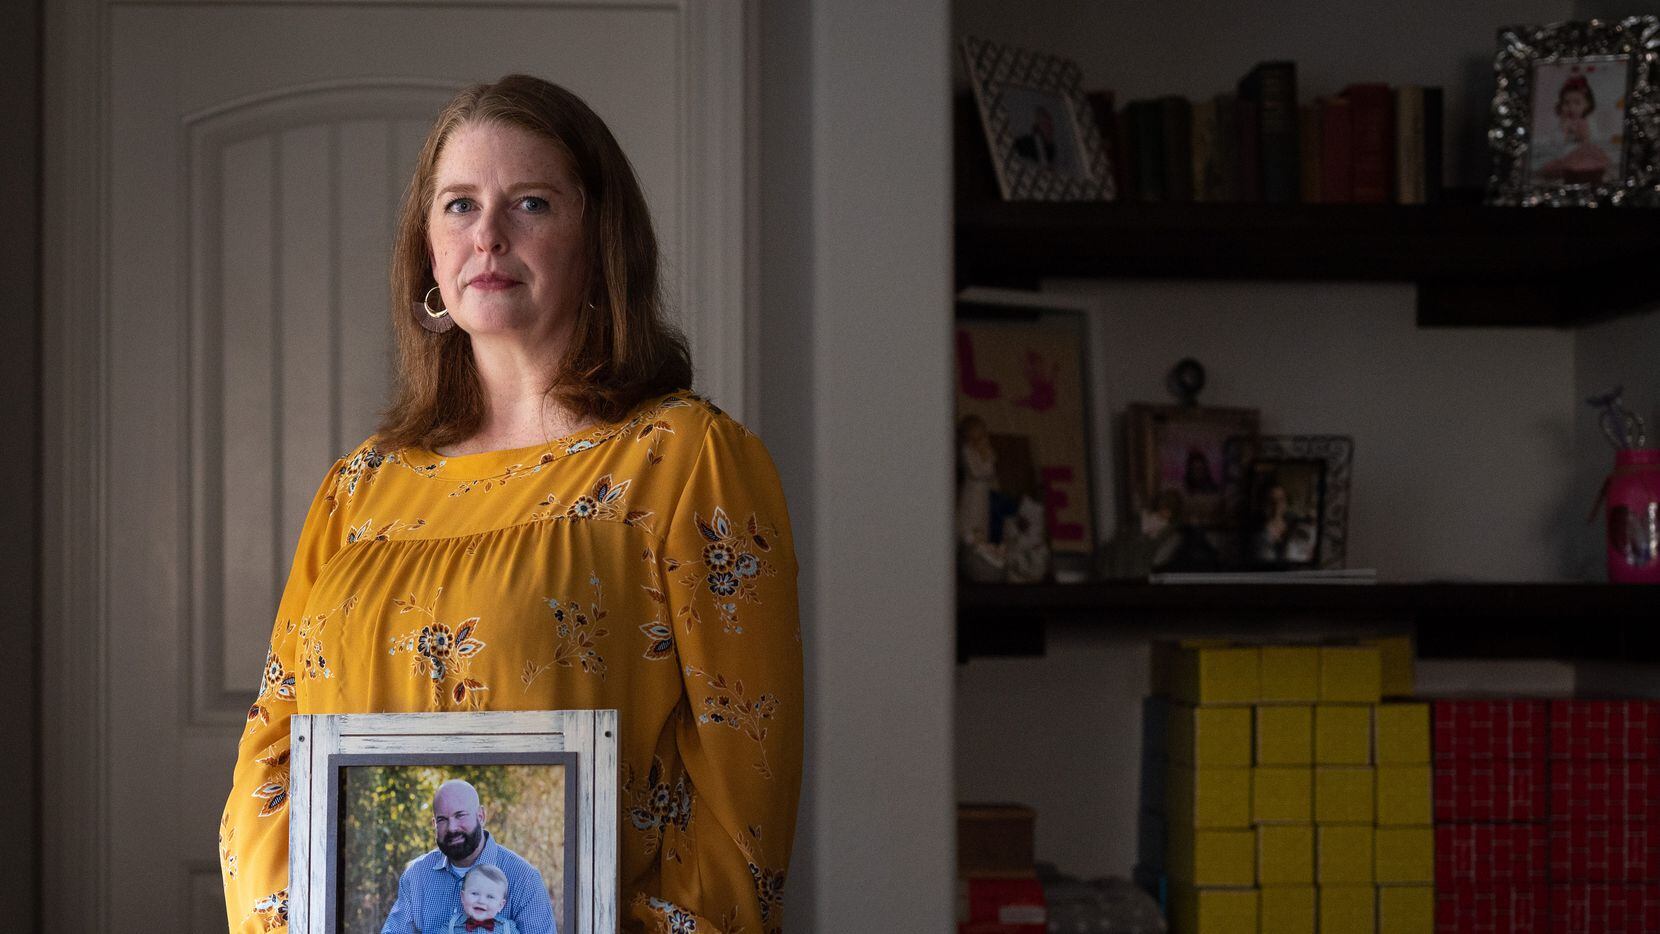 Katie McCoy poses Nov. 4, 2021, at her home in Forney with a photo of Dallas police Sgt. Bronc "Bronco" McCoy, the father of her children who died last year of causes related to COVID-19. Sgt. McCoy was the first Dallas police officer to die of the virus.